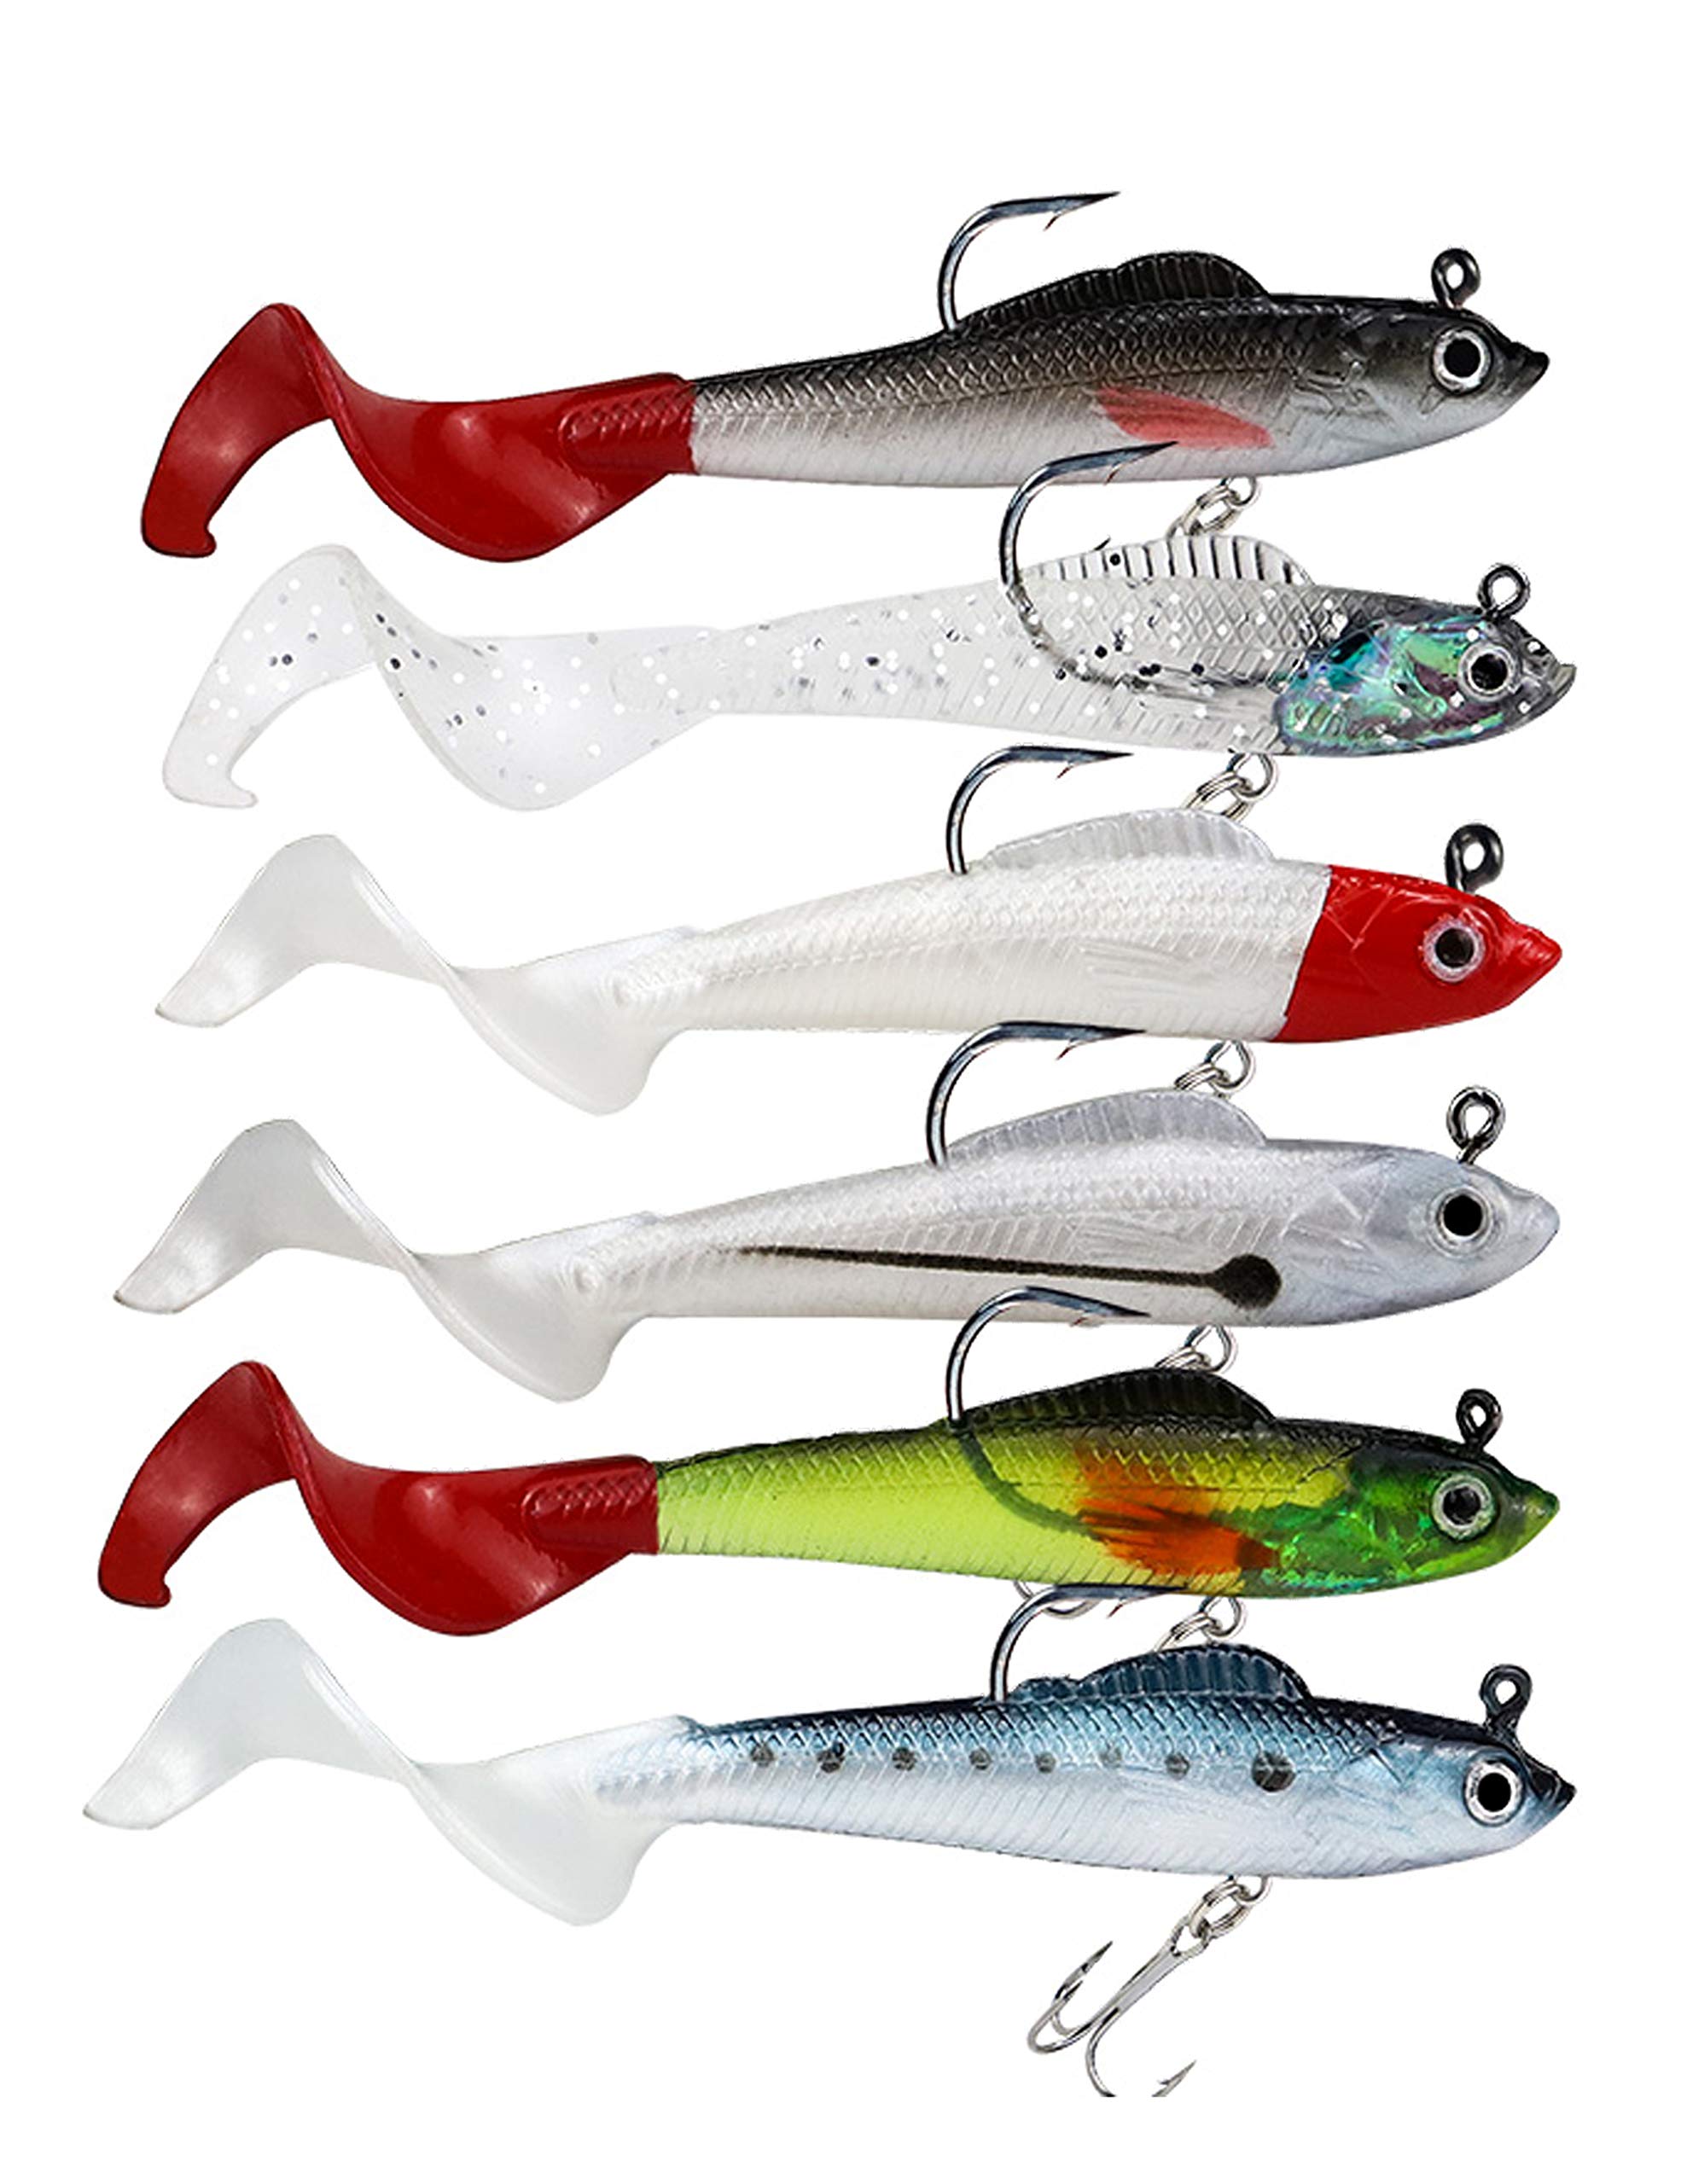 12 Pieces Fishing Lures Soft Plastic Lures for Bass Jig Head Soft Swimbait  Lifelike Plastic Baits Tackle Kit for Saltwater and Freshwater, Multi Color